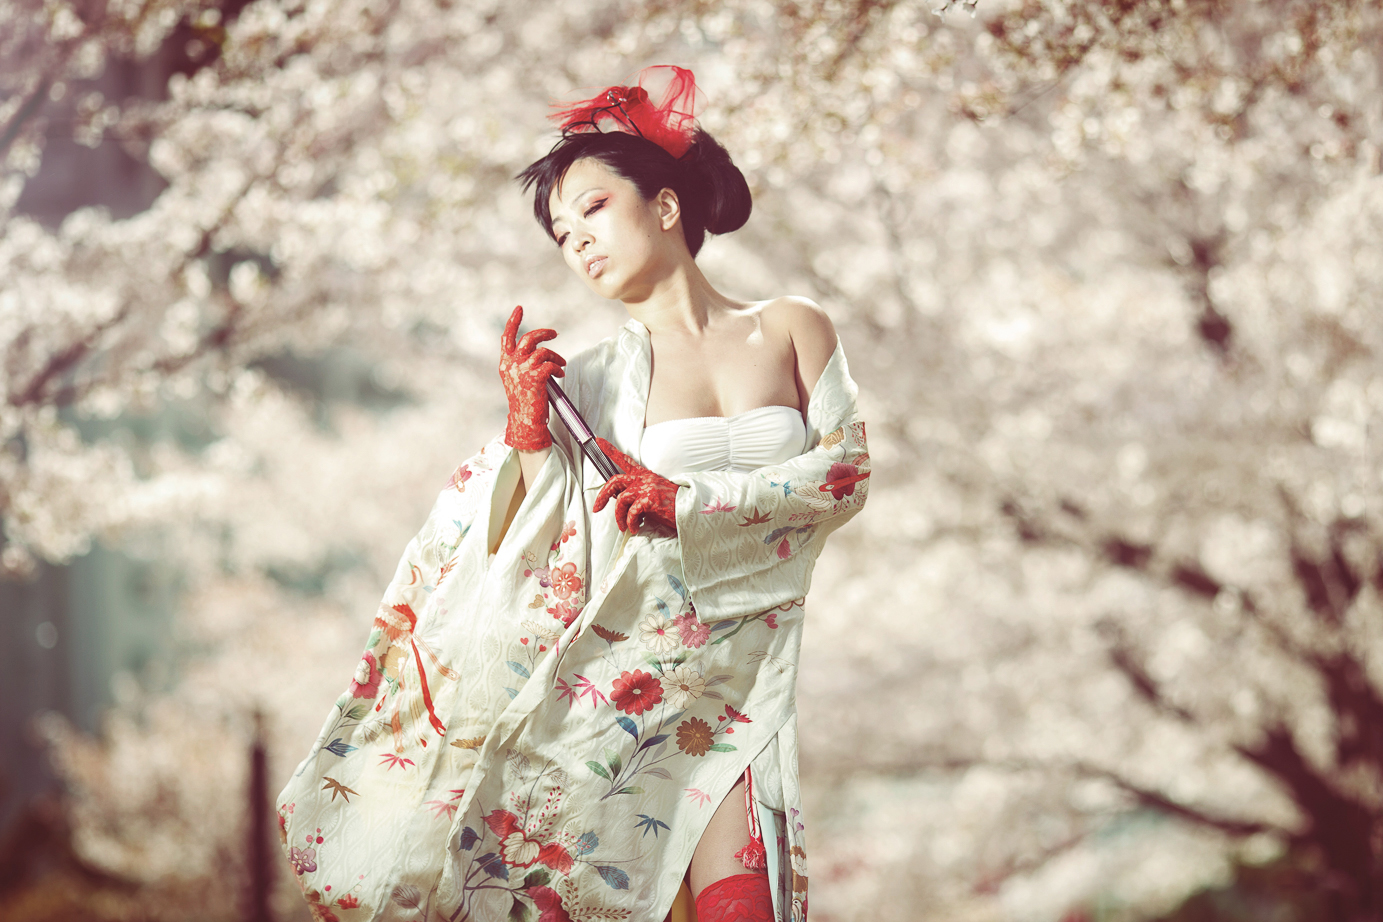 Shooting it: Portraits in Cherry Blossoms / 桜でポートレート